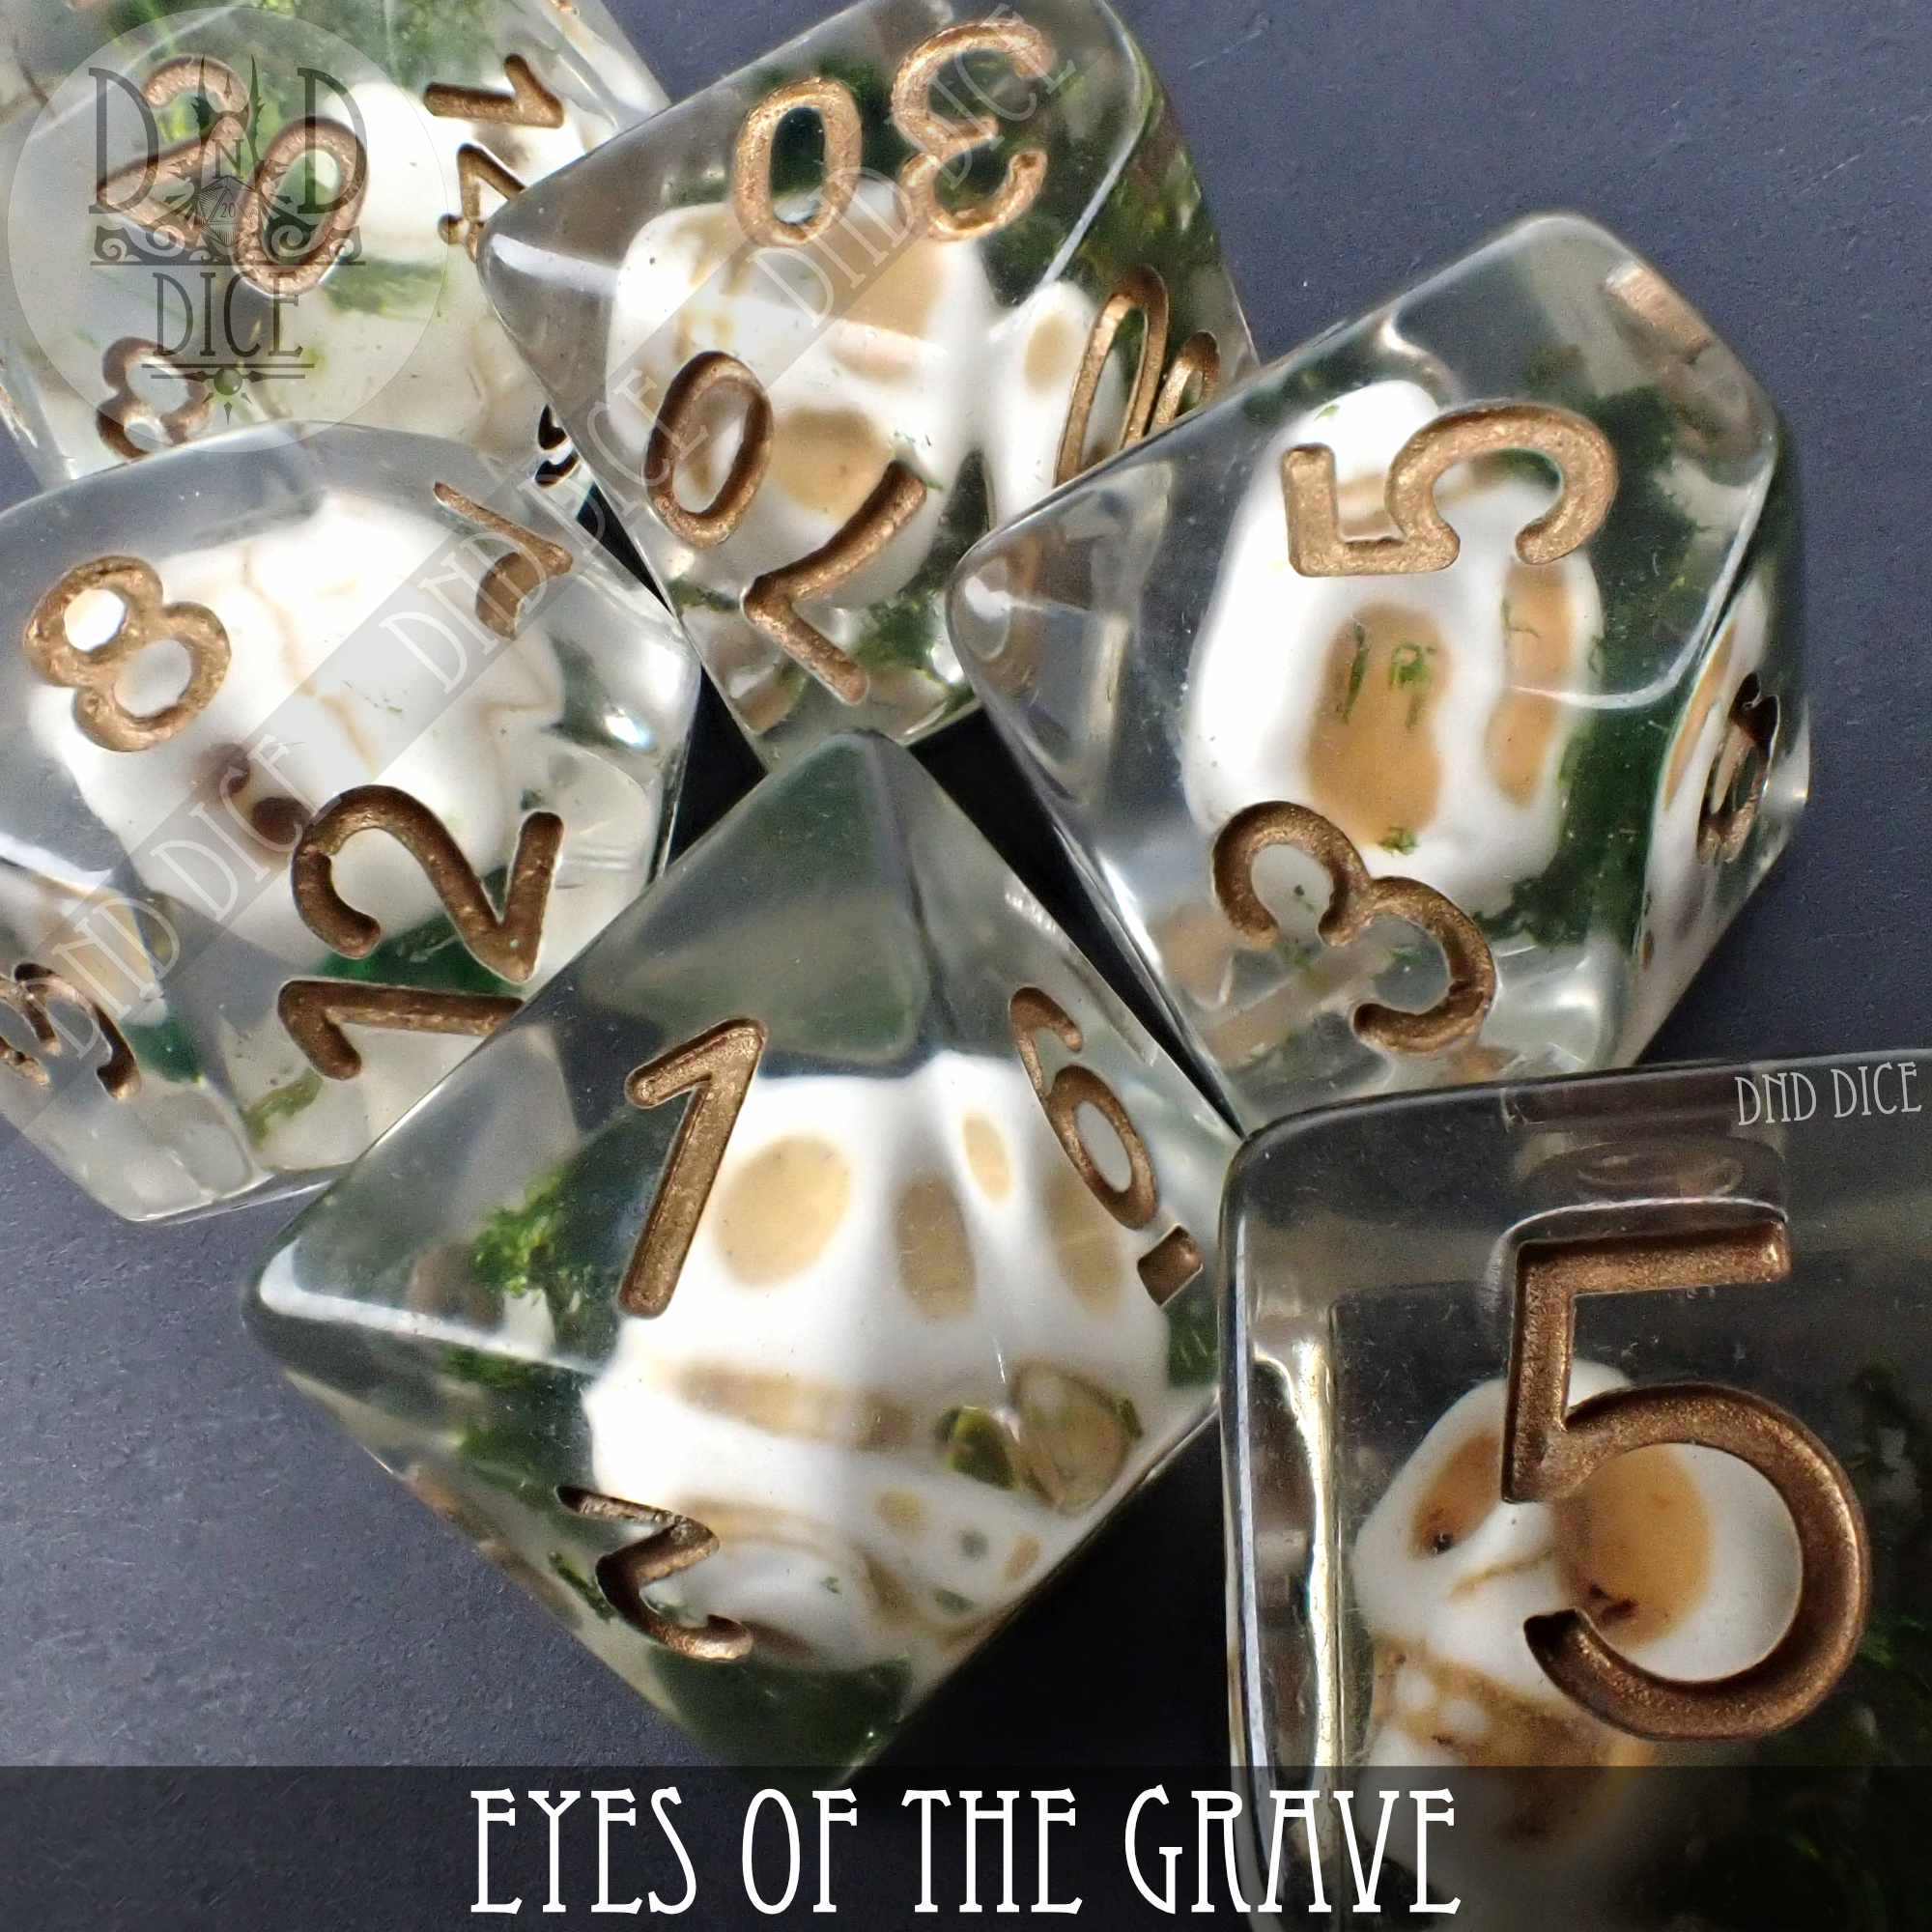 Eyes of the Grave Dice Set